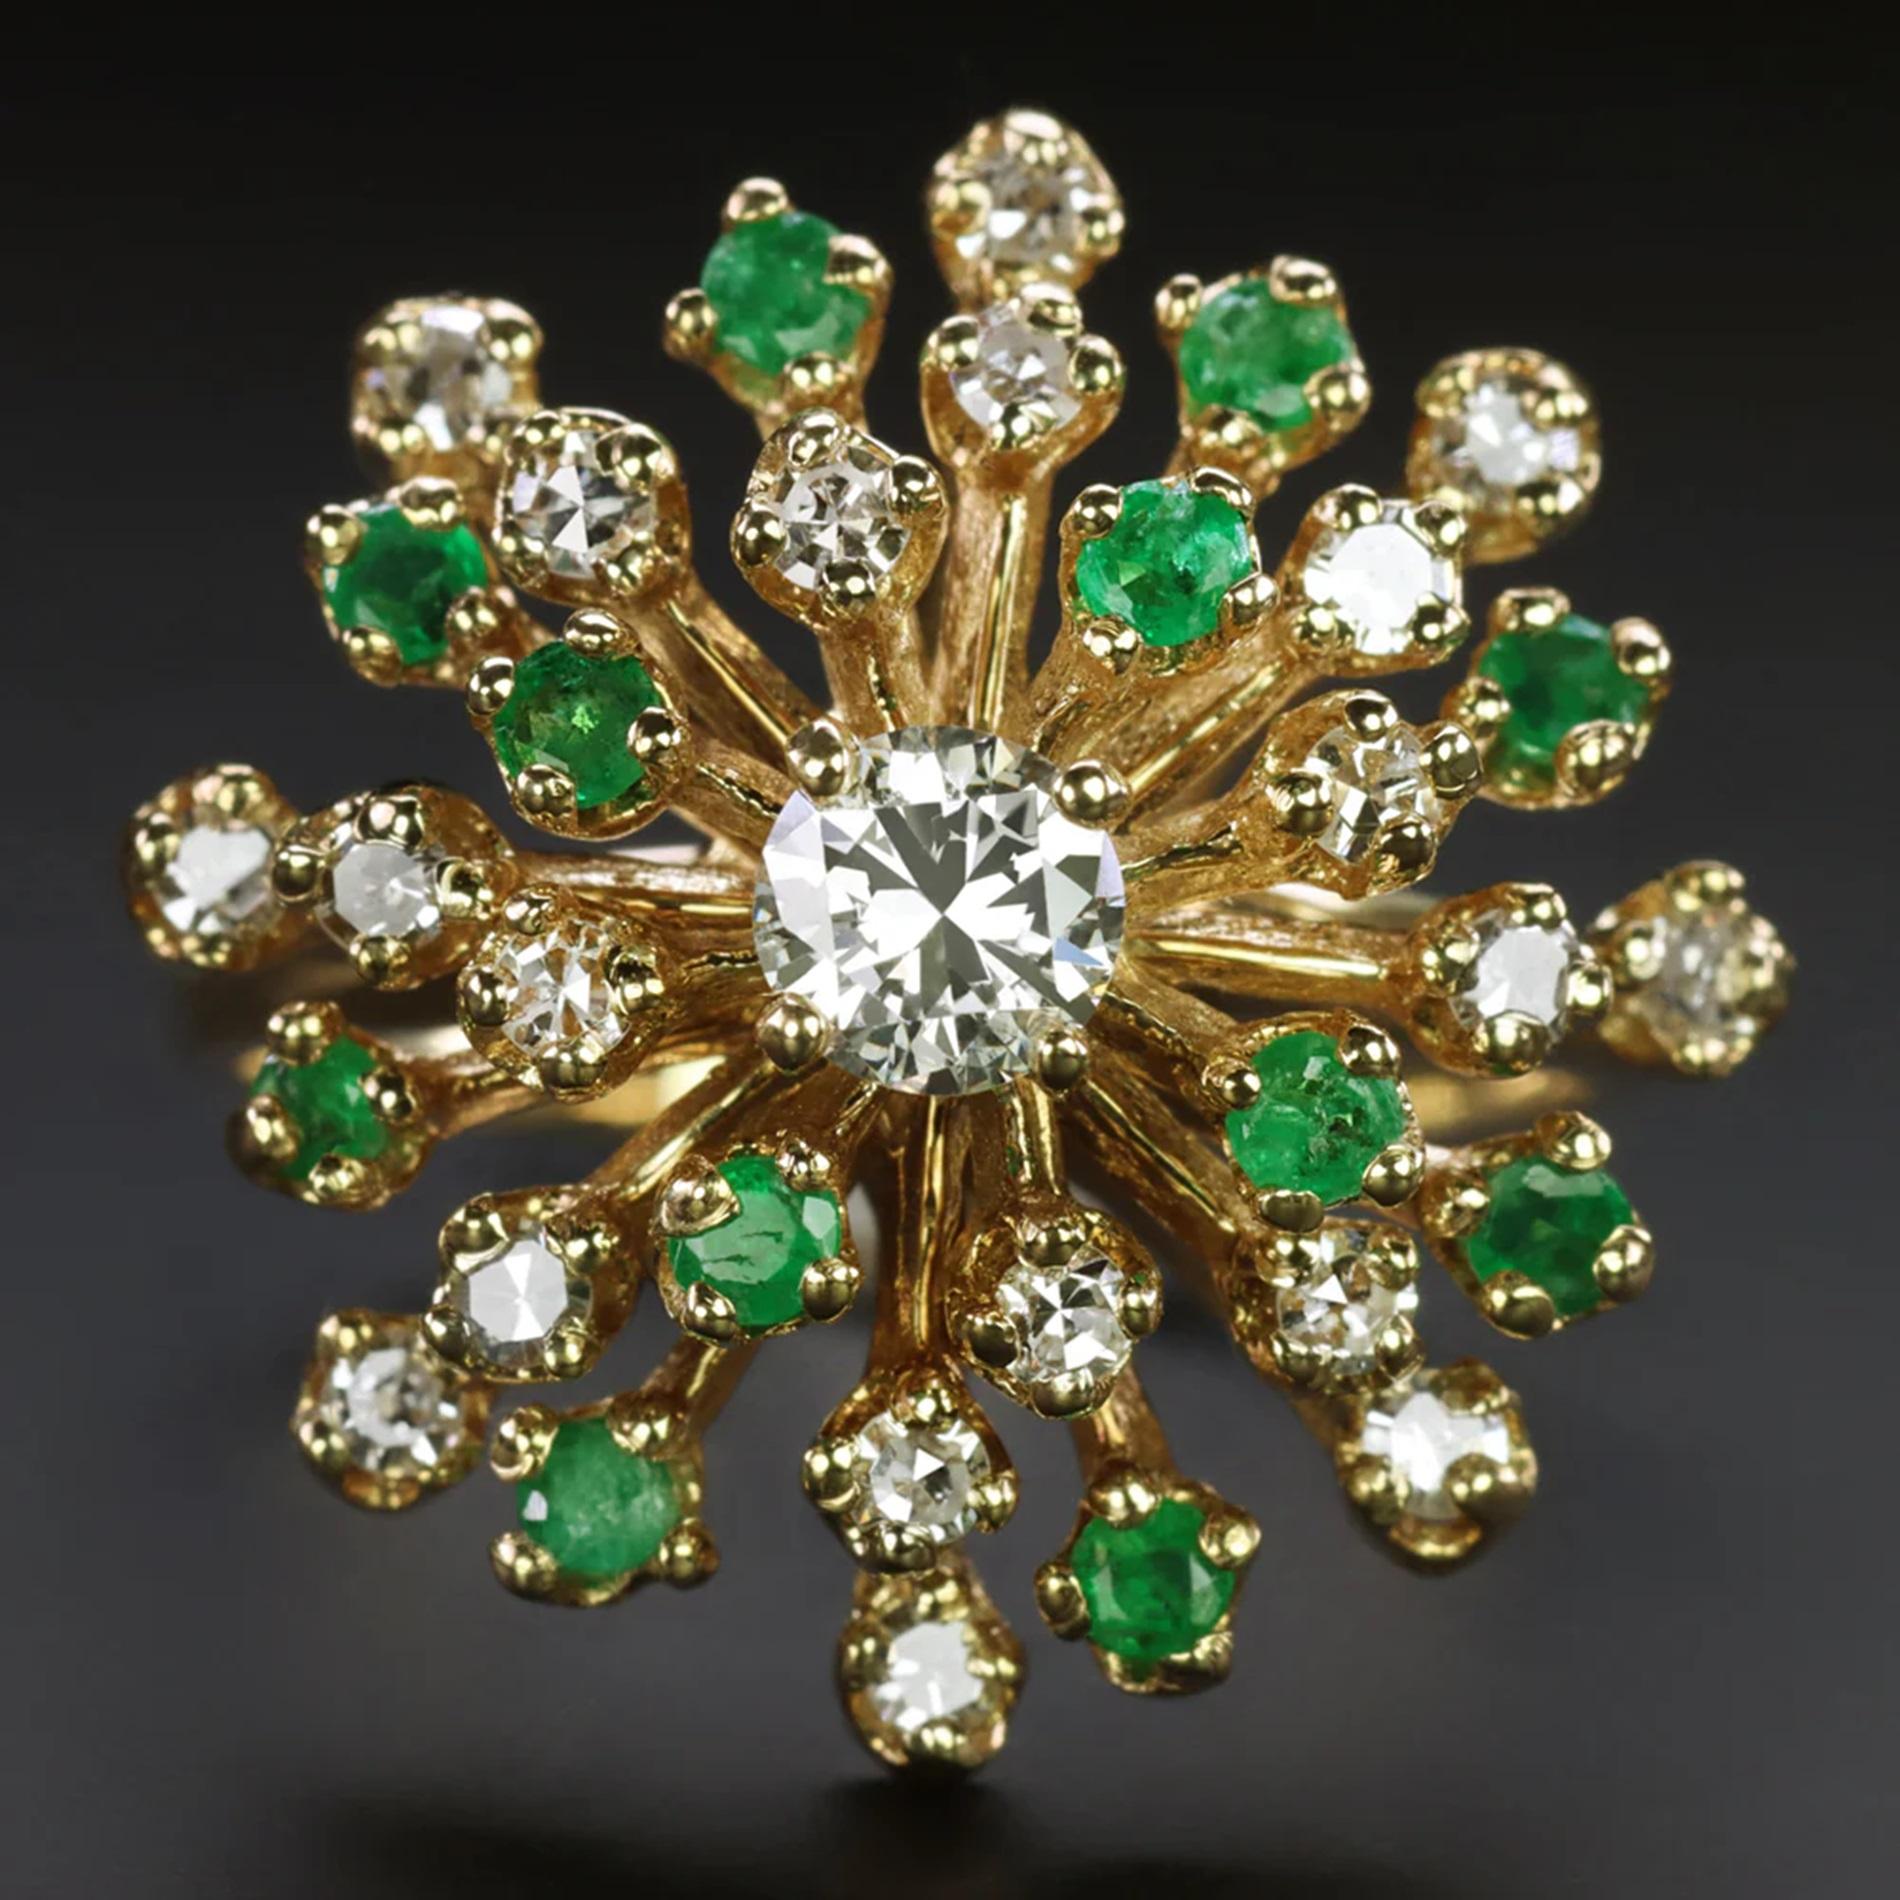 Introducing a mesmerizing vintage ring showcasing a radiant cluster of diamonds and emeralds swirling around a vibrant diamond center. Each tier of this unique design partially rotates, creating a captivating twinkling effect that is both satisfying